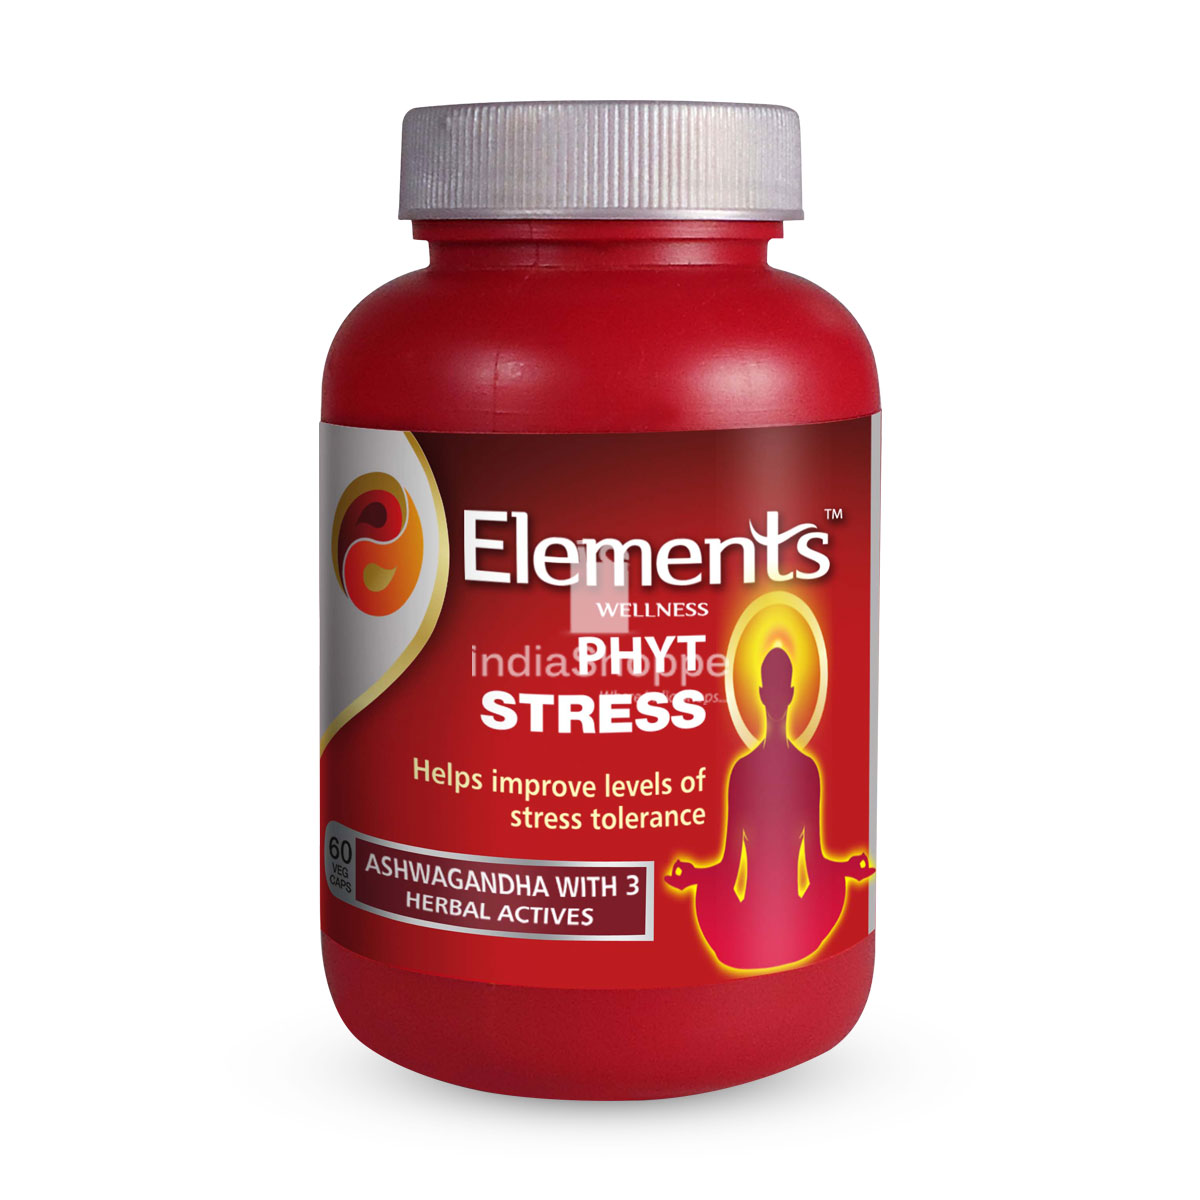 Buy Elements-Phyt Stress at Best Price Online